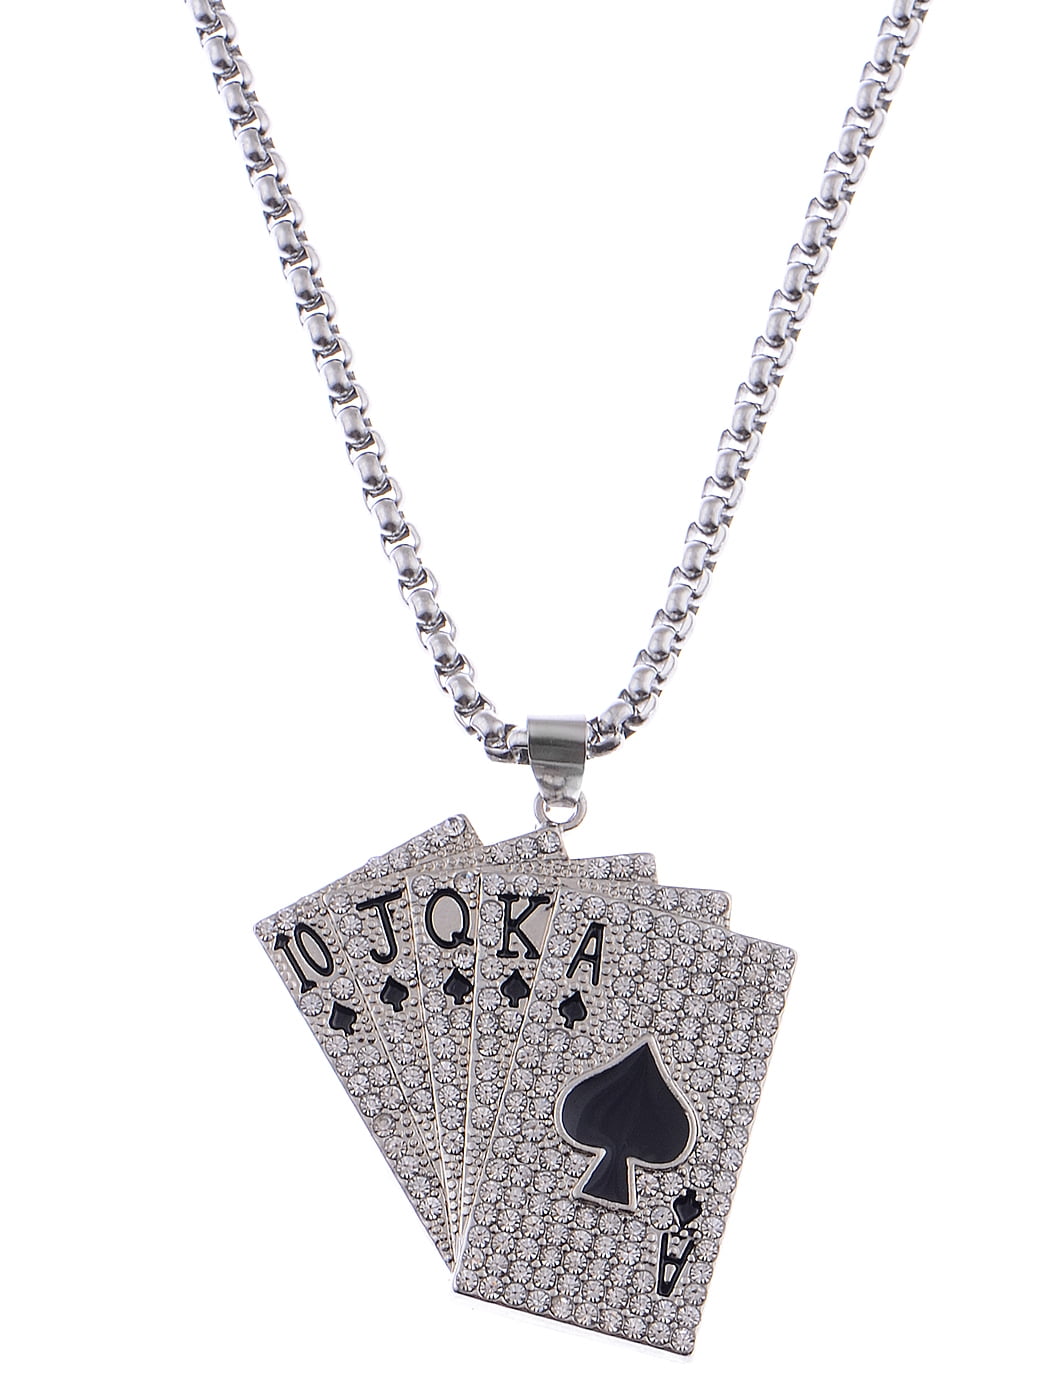 Ace Of Spades Necklace Poker A Playing Cards Pendant Necklace Fortune Punk  | eBay